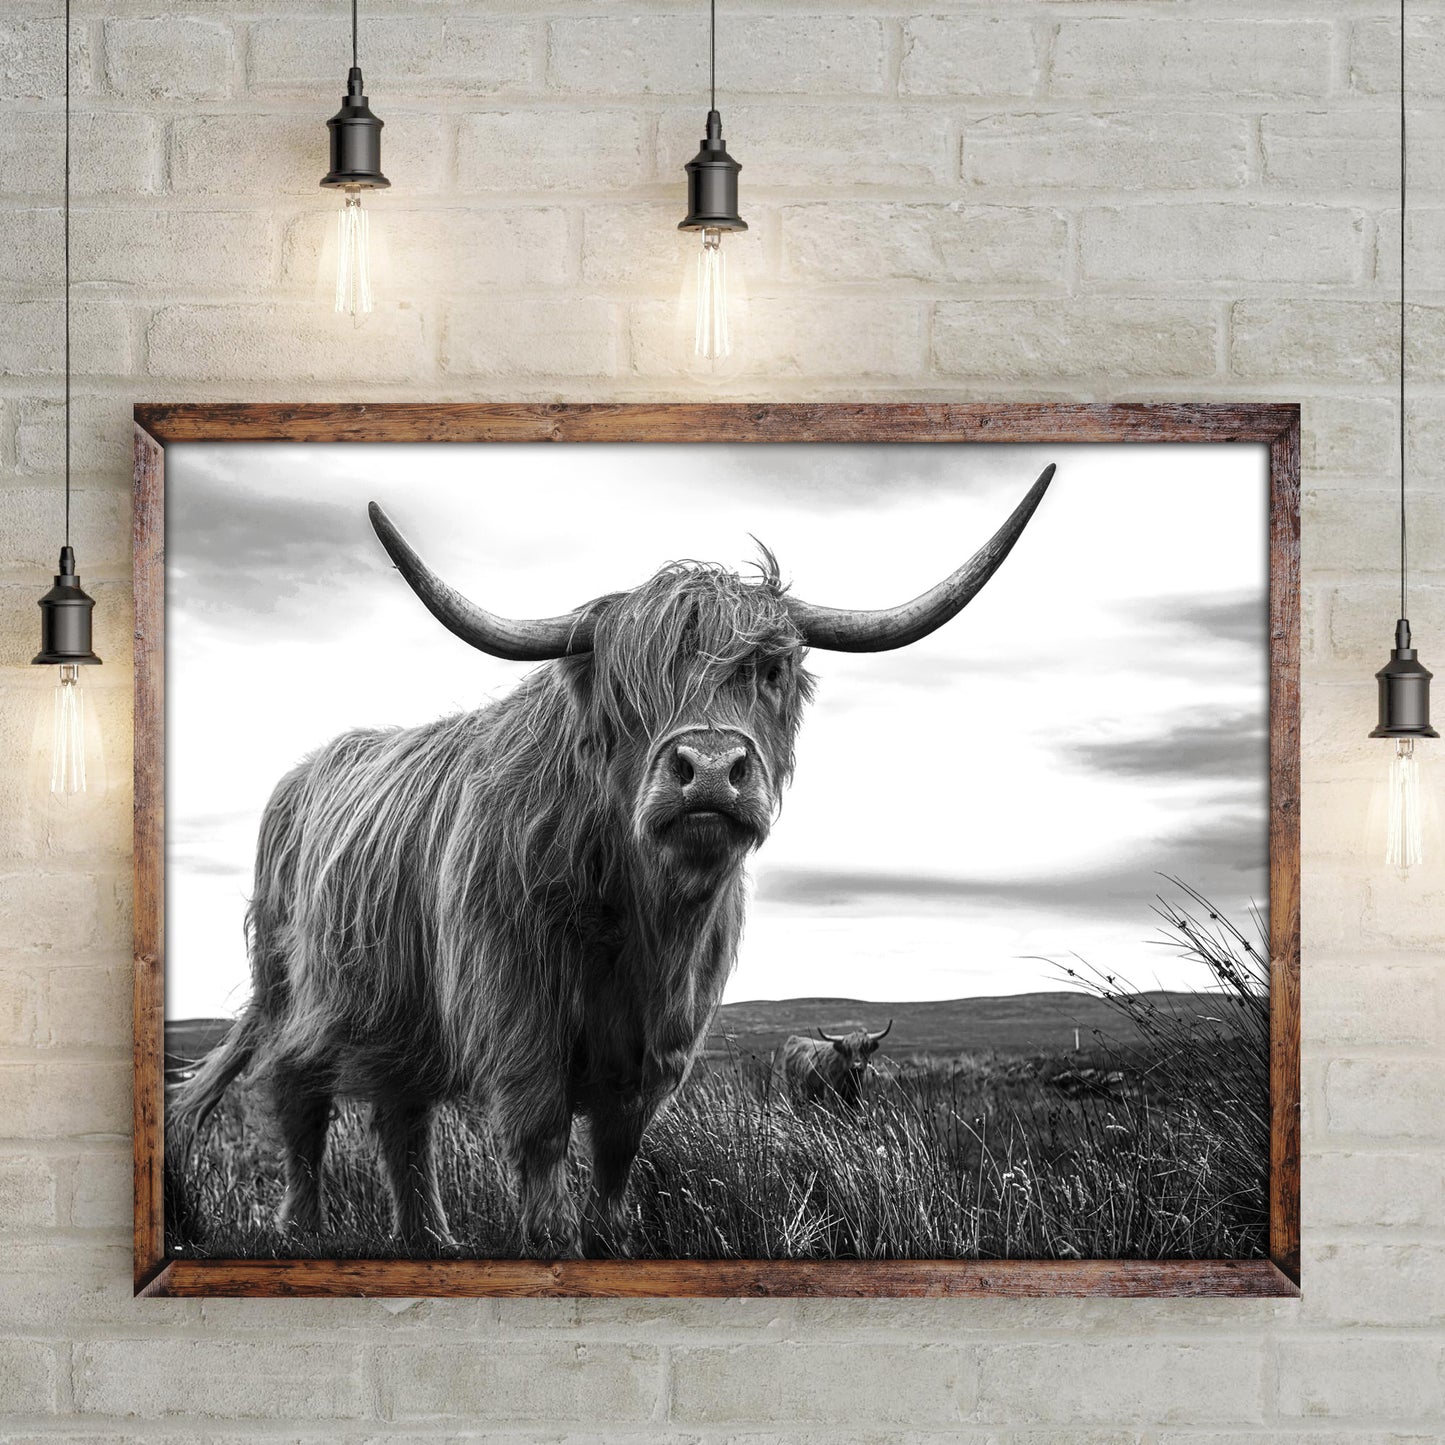 Highland Cow Black And White Portrait Canvas Wall Art - Image by Tailored Canvases